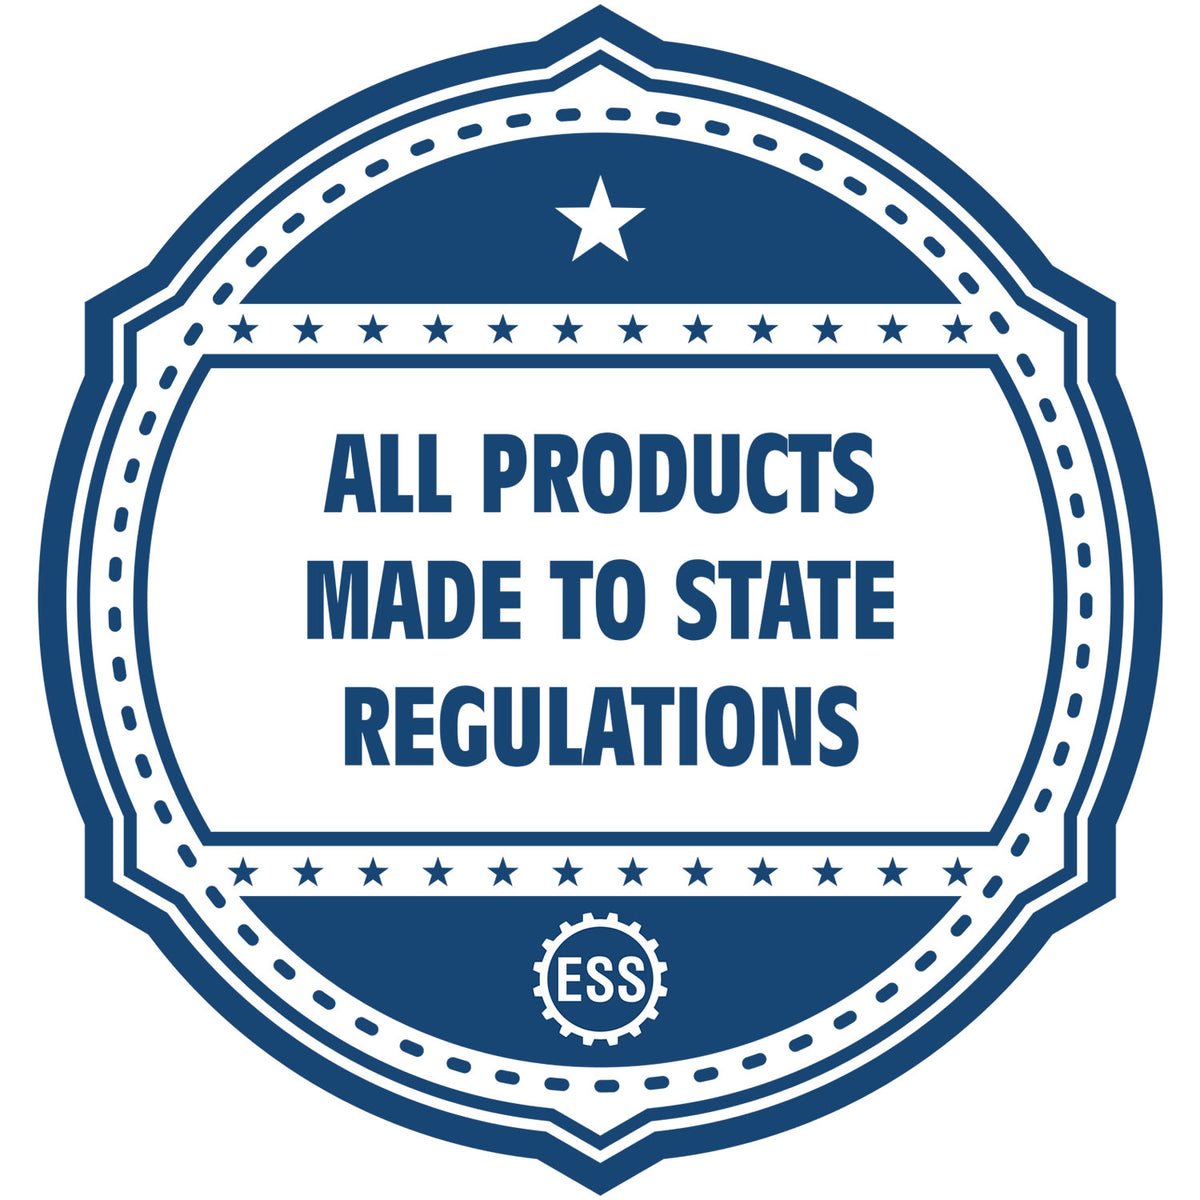 A blue icon or badge for the Gift Kentucky Landscape Architect Seal showing that this product is made in compliance with state regulations.